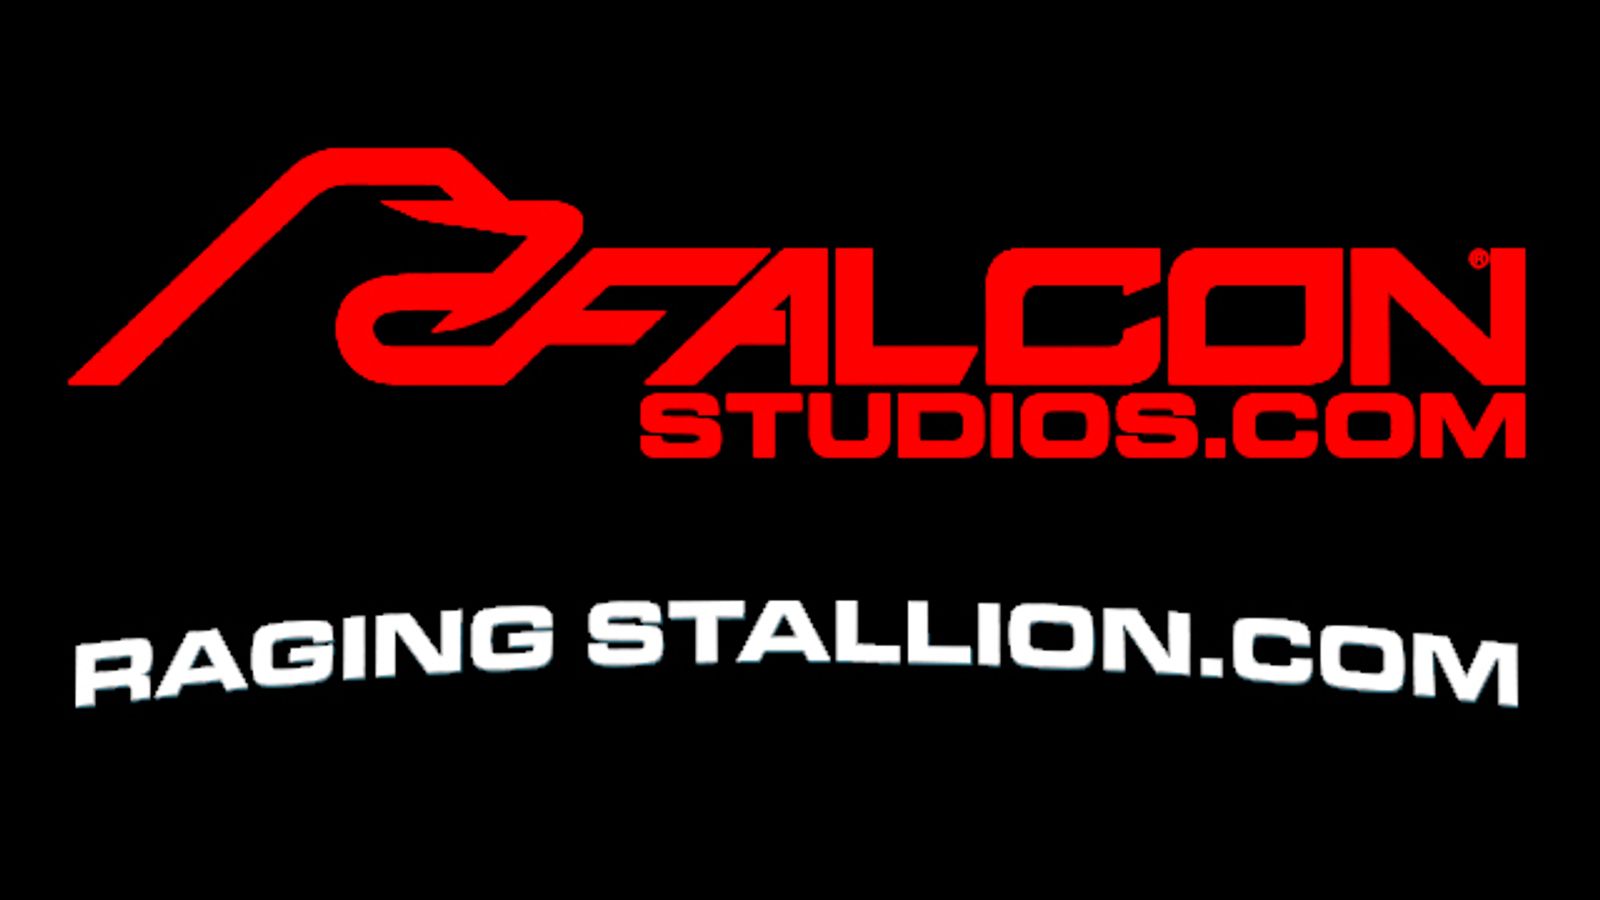 FalconStudios.com and RagingStallion.com Increase Update Frequency